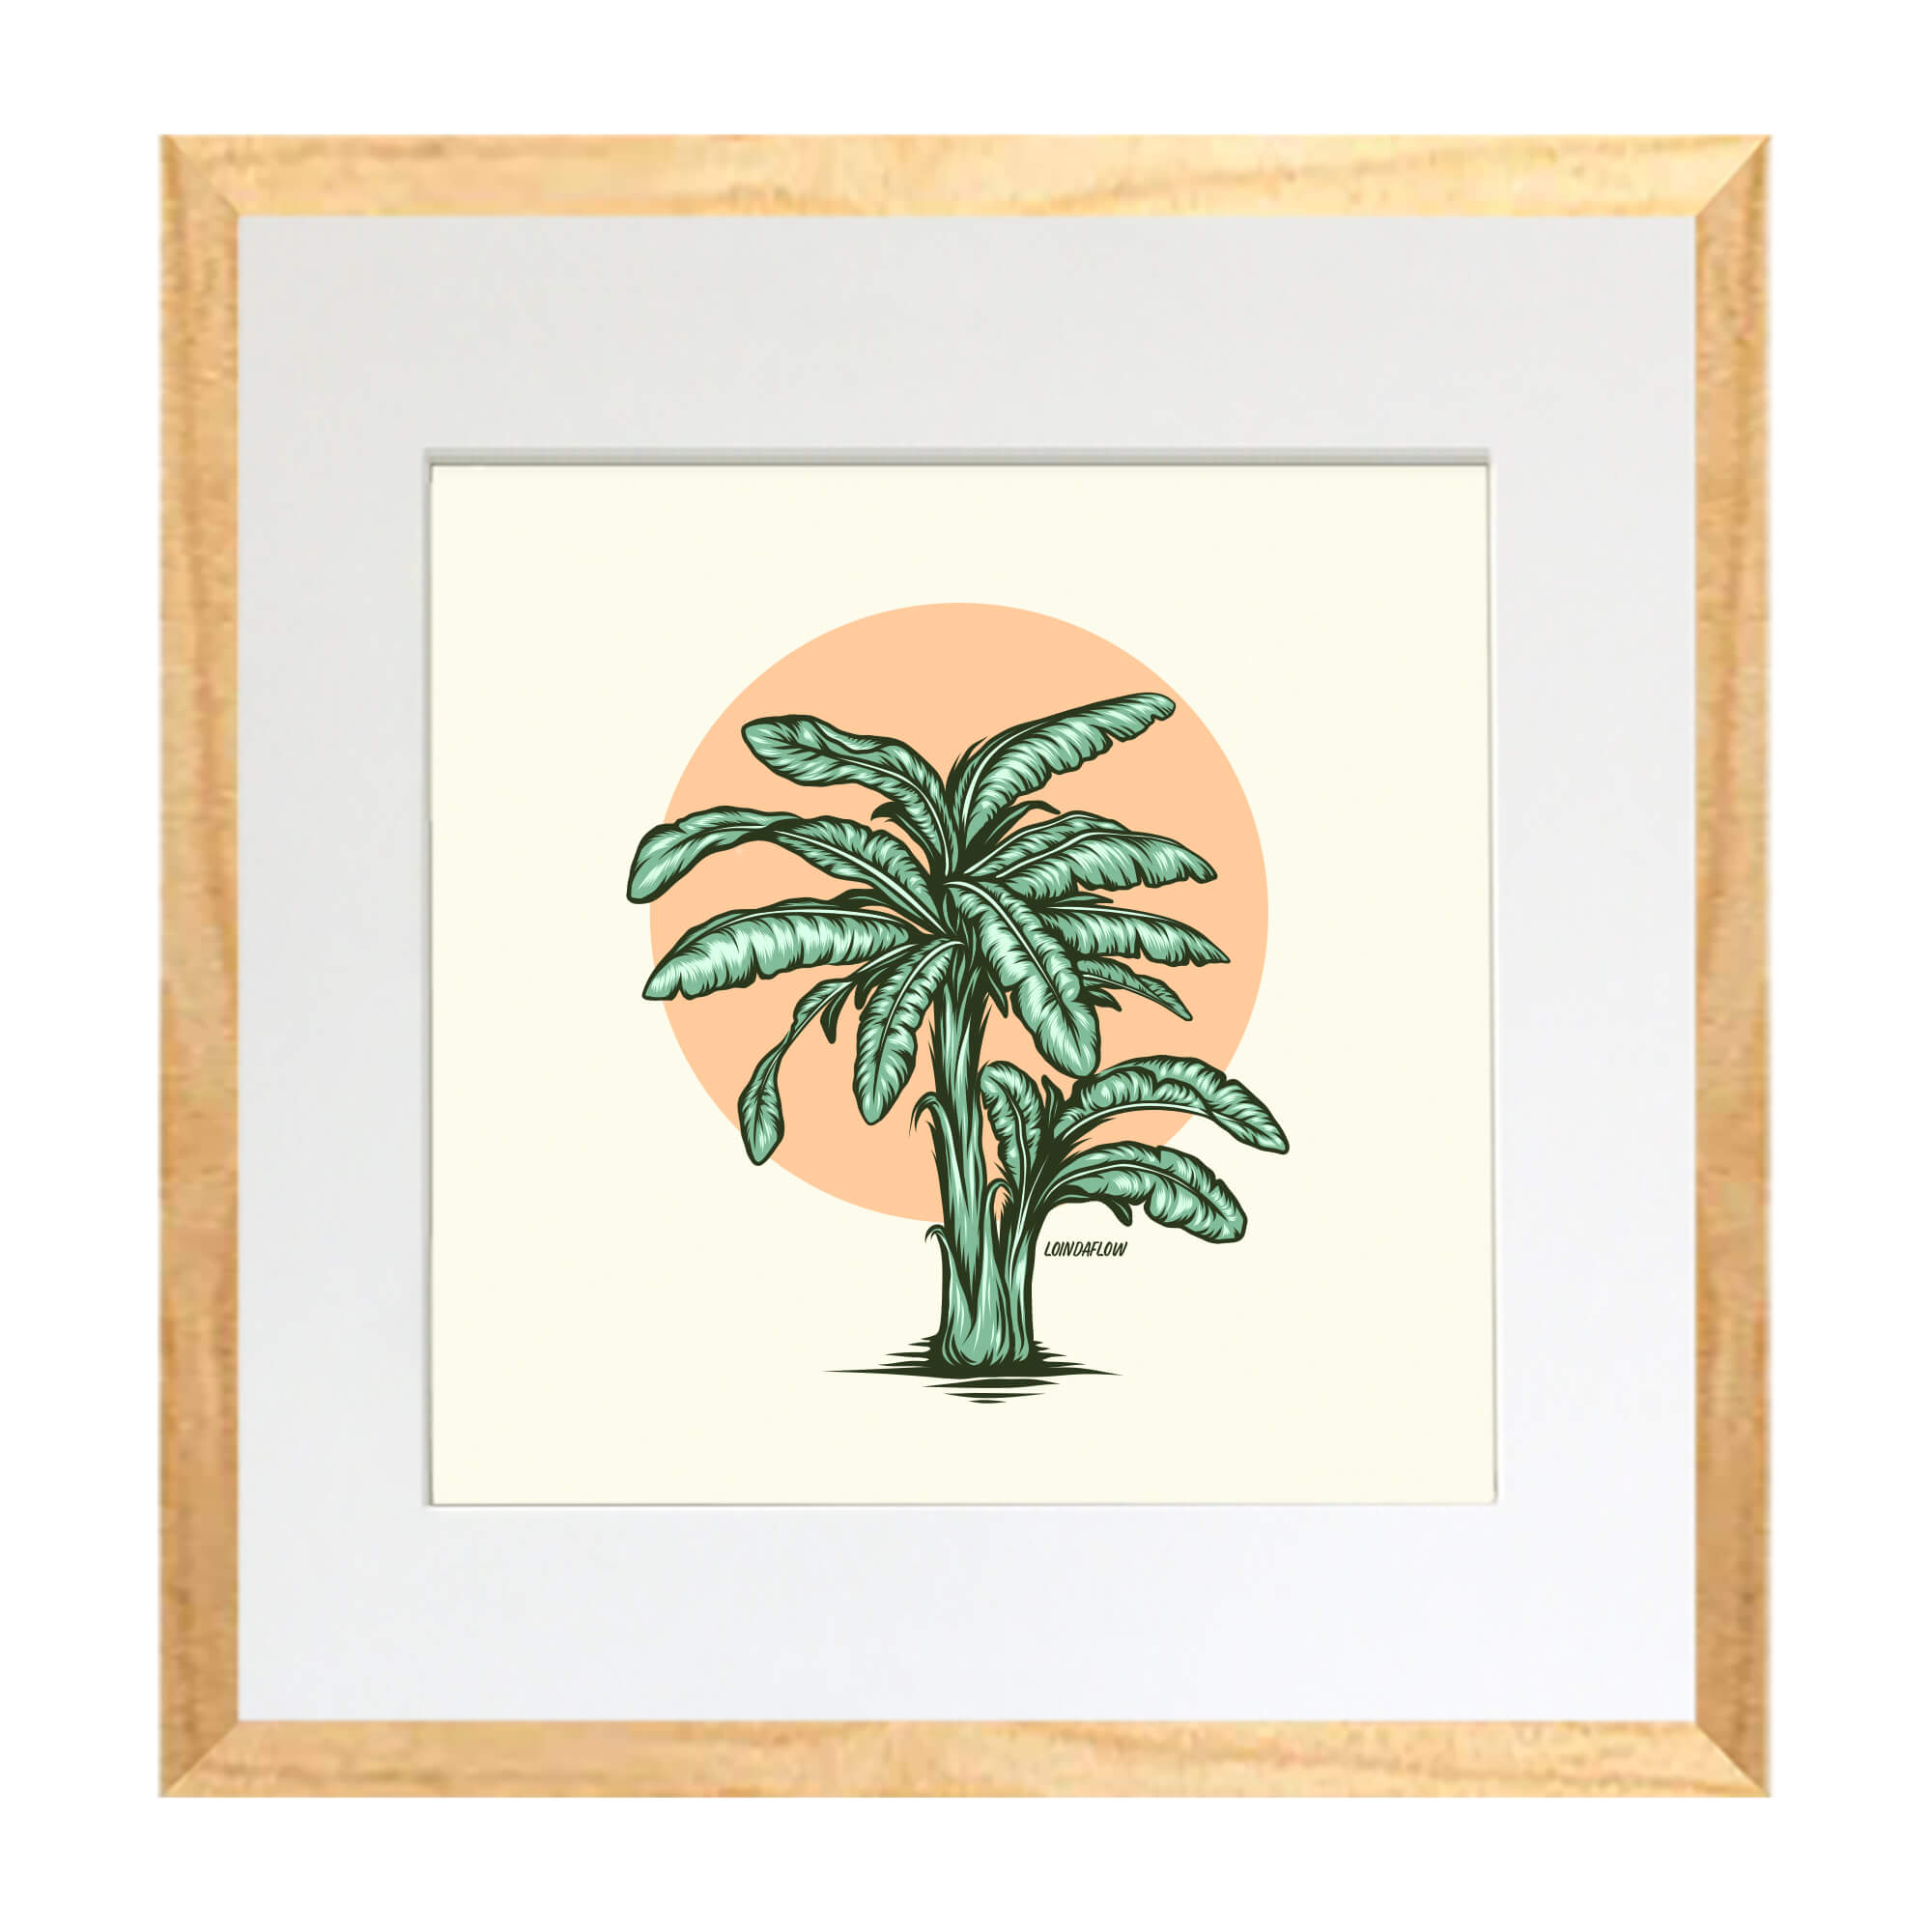 Matted art print with wood frame of a banana tree with yellow background by Hawaii artist Laihha Organna